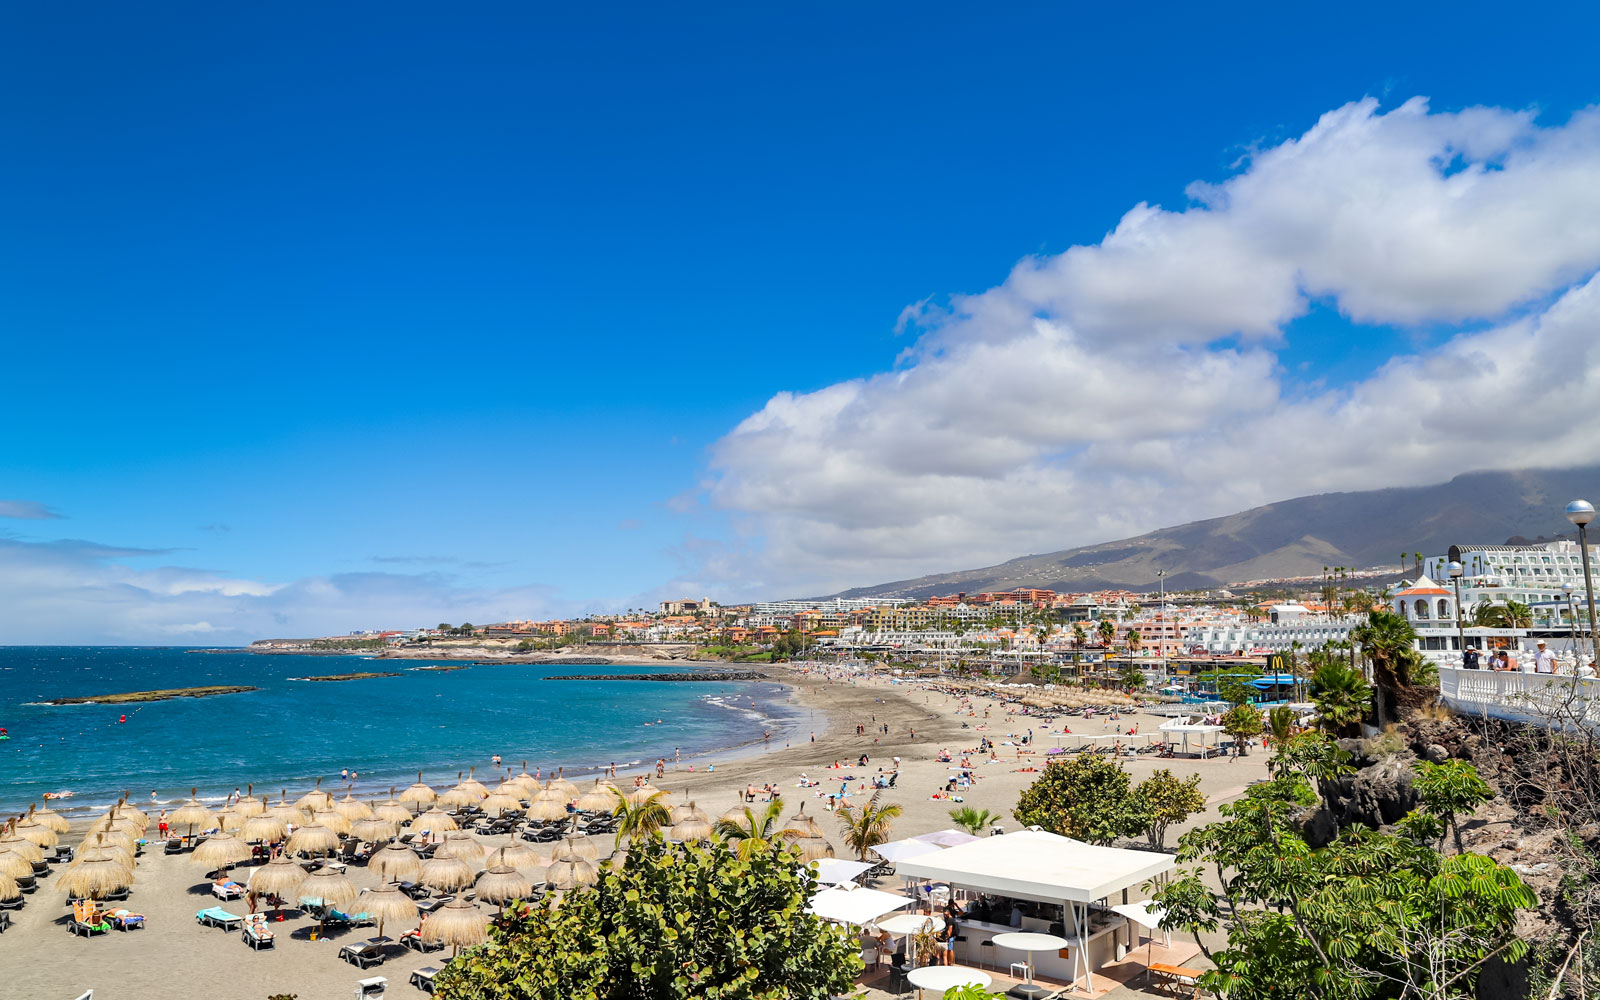 Tenerife beach and numerous resorts and hotel alongside